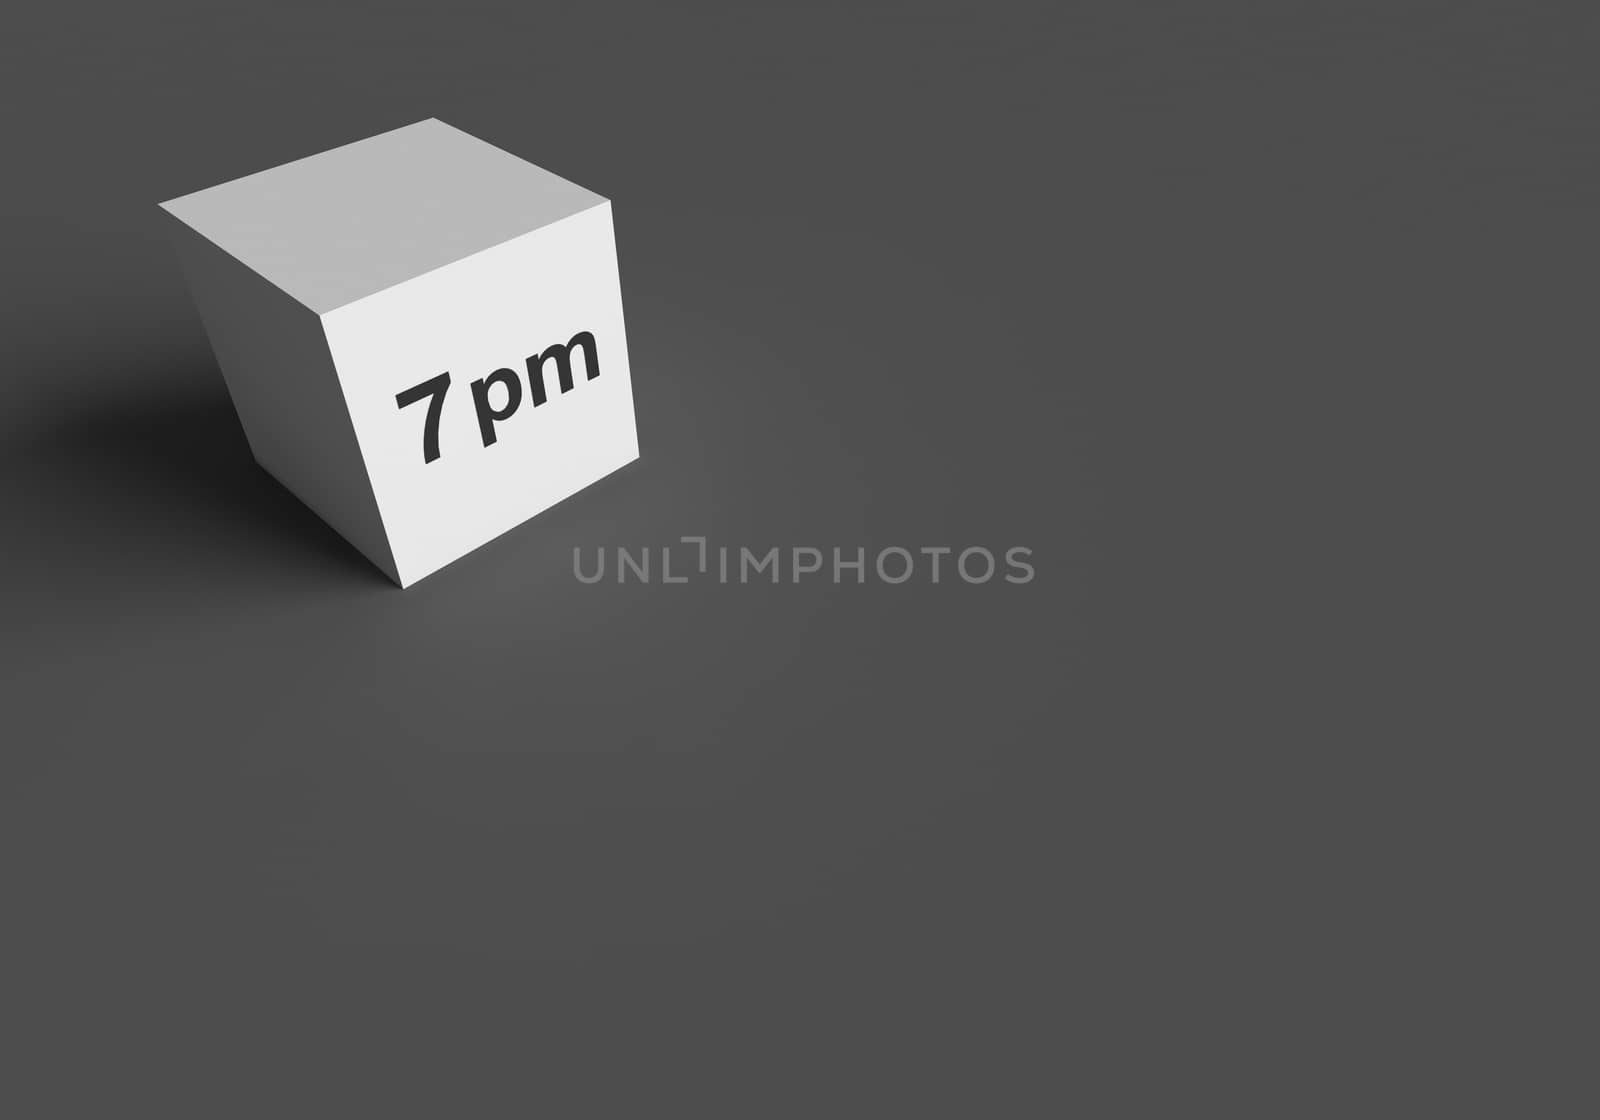 3D RENDERING WORDS 7 pm ON WHITE CUBE, STOCK PHOTO